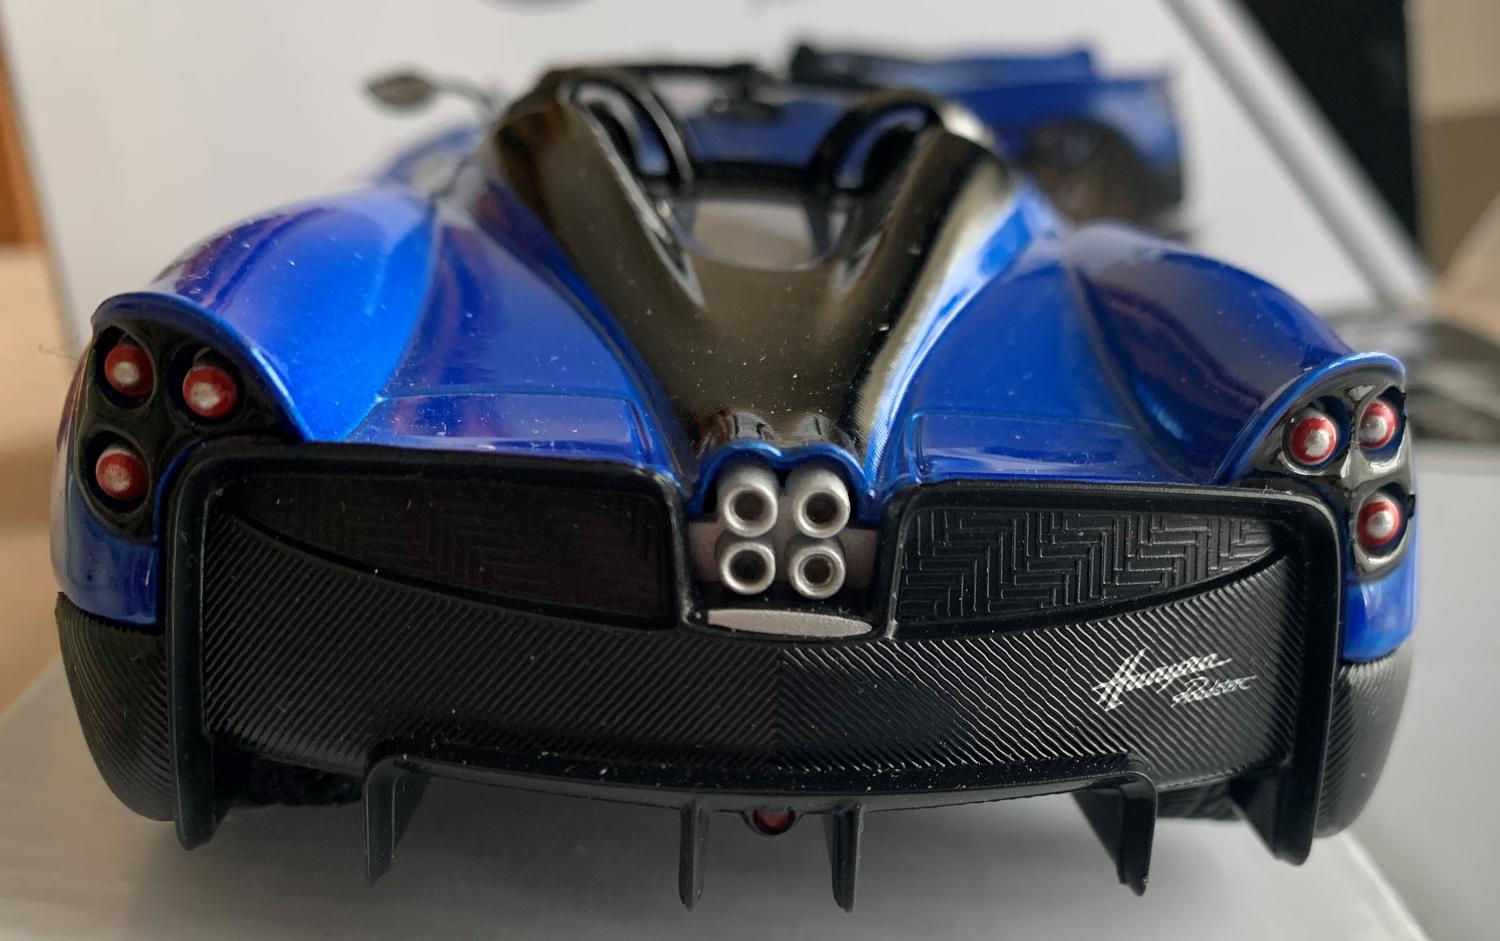 Pagani Huayra Roadster in blue 1:24 scale model from Motormax